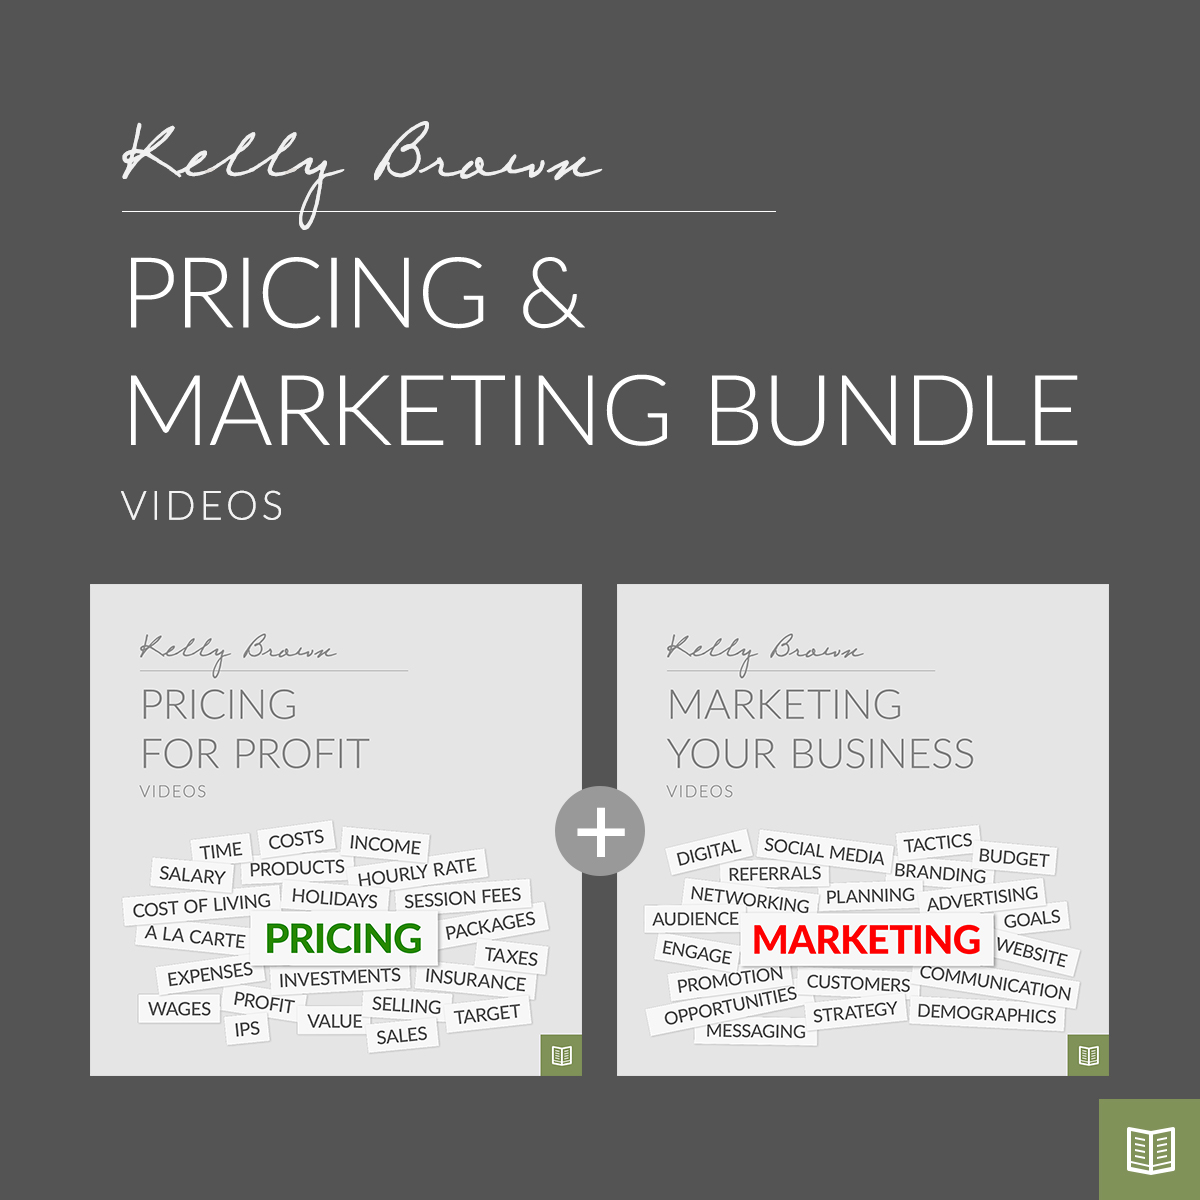 You are currently viewing Pricing and Marketing Bundle with Kelly Brown